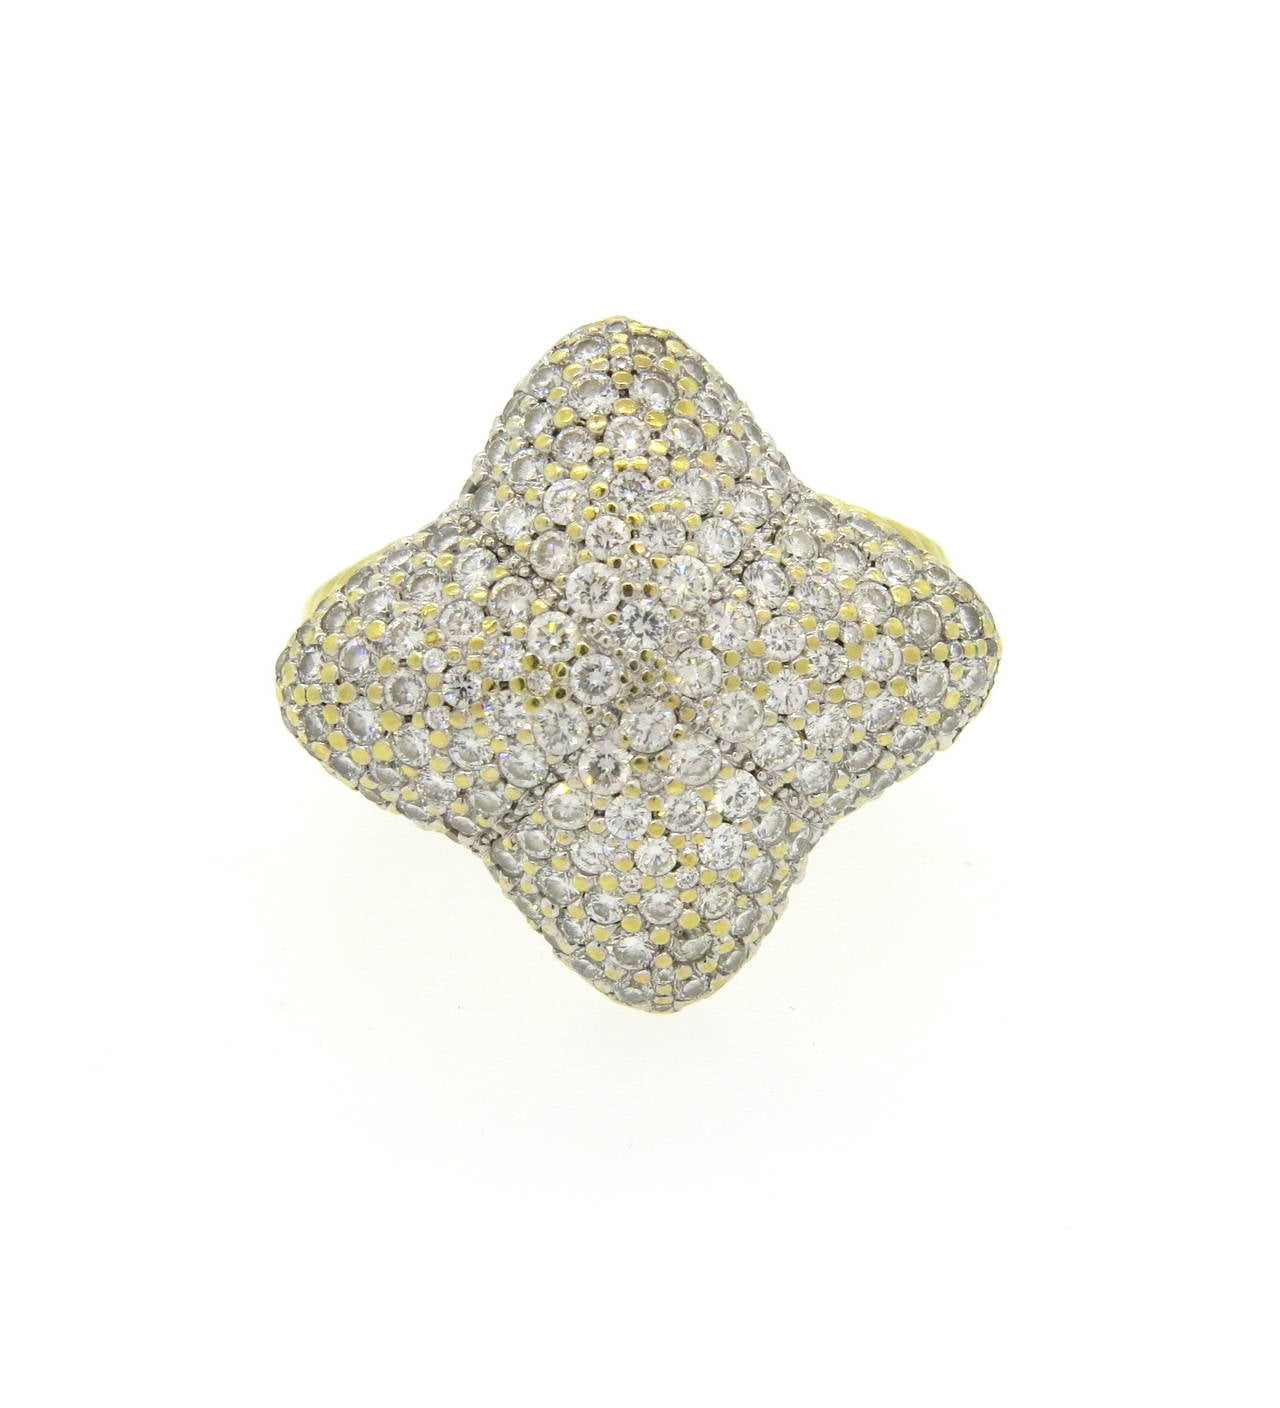 An 18k yellow gold ring set with 1.92ctw of G/VS diamonds.  Crafted by David Yurman for the Quatrefoil collection, the ring is a size 6.75 and the top of the ring measures 23mm x 23mm.  The weight of the ring is 14.3 grams.  The ring currently